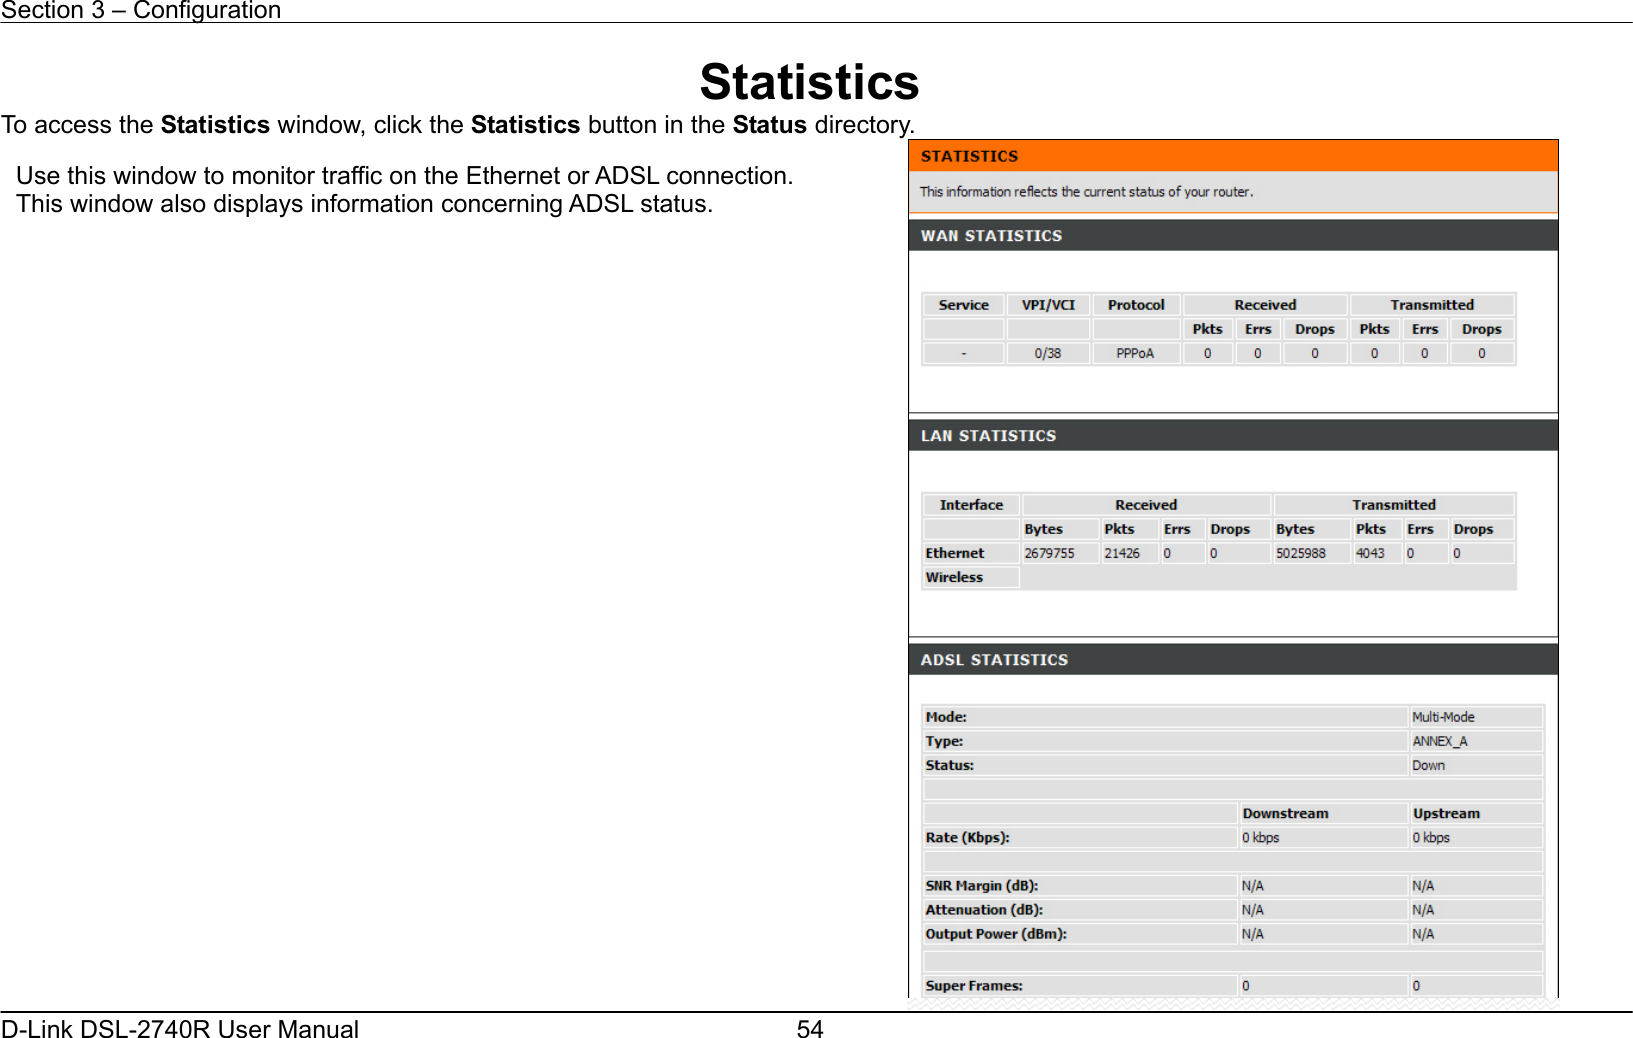 Section 3 – Configuration   D-Link DSL-2740R User Manual  54Statistics To access the Statistics window, click the Statistics button in the Status directory.  Use this window to monitor traffic on the Ethernet or ADSL connection. This window also displays information concerning ADSL status. 